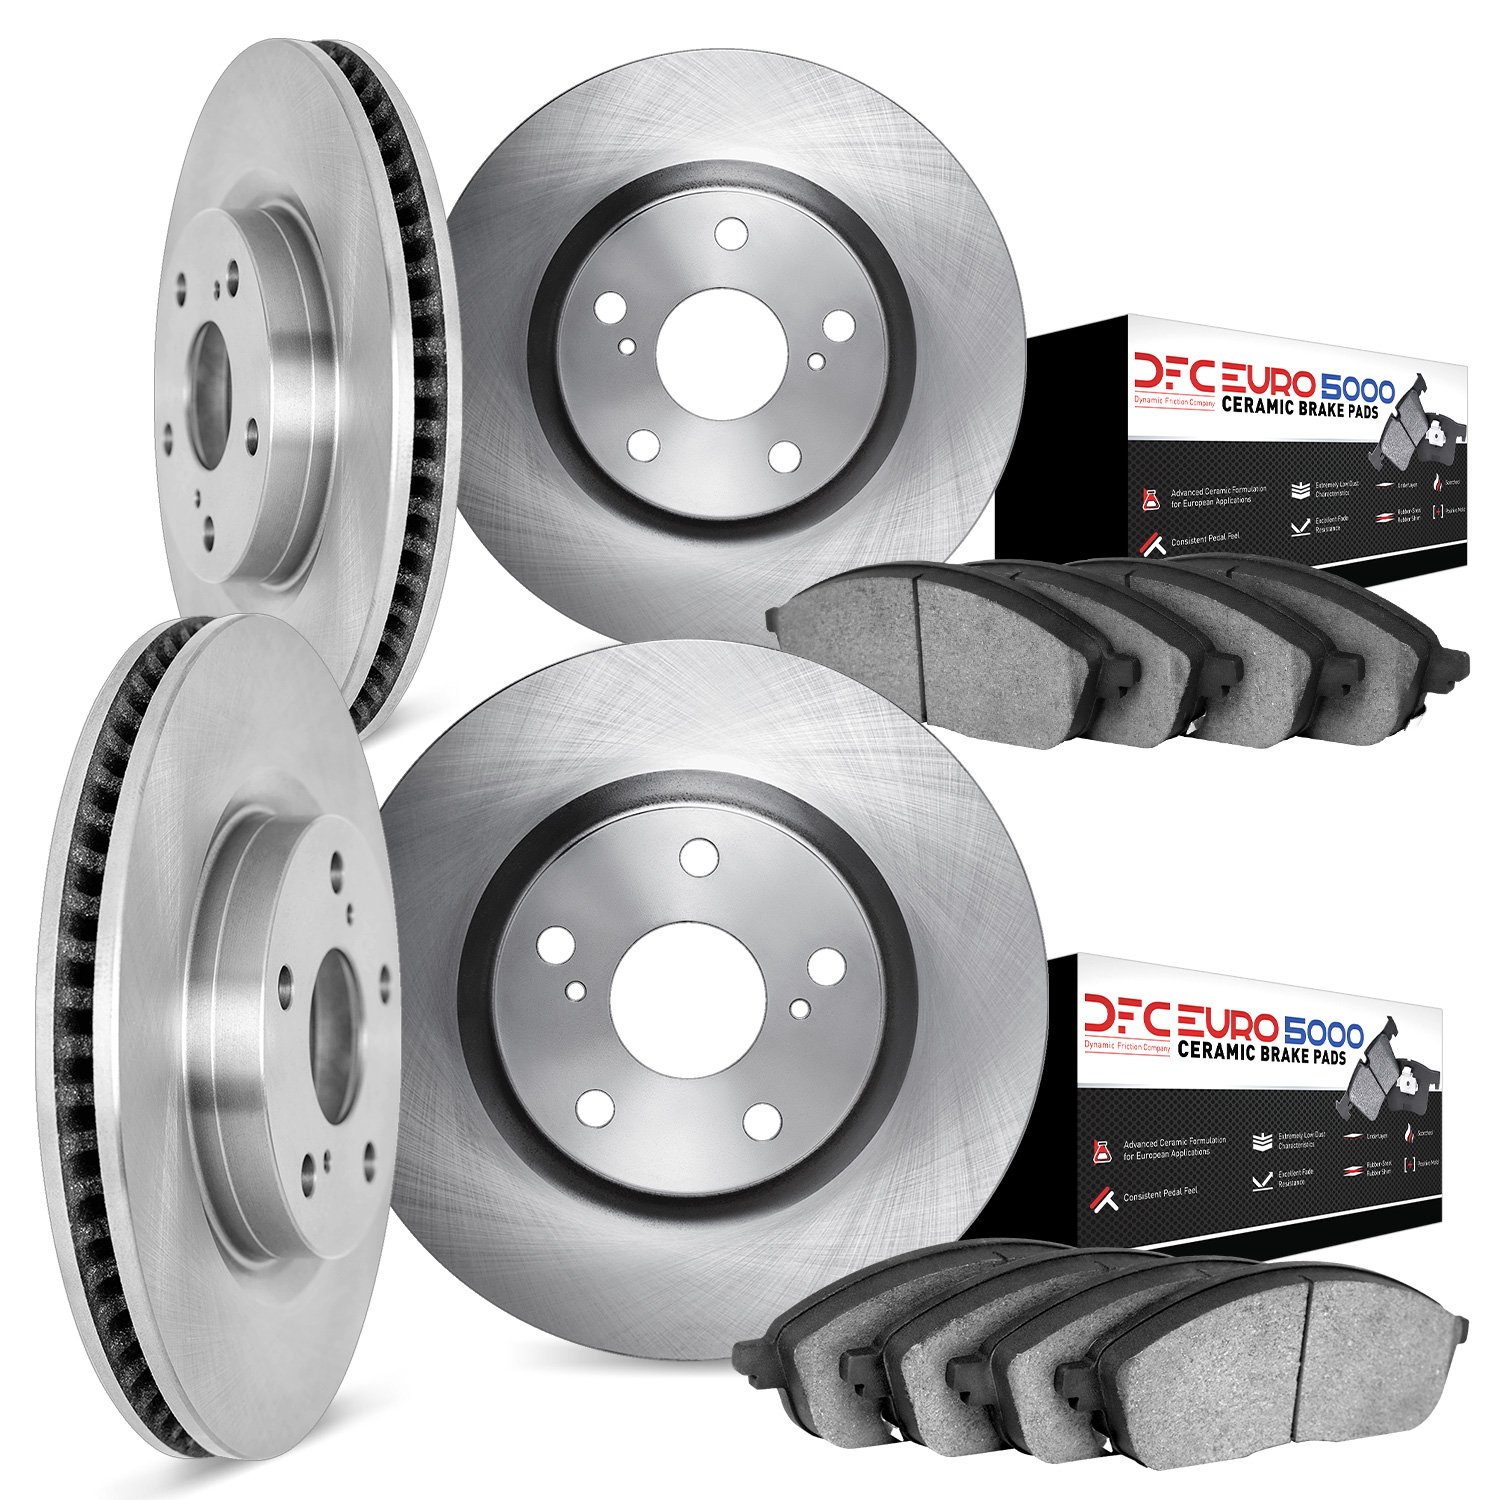 6604-63025 Brake Rotors w/5000 Euro Ceramic Brake Pads, 2006-2011 Mercedes-Benz, Position: Front and Rear